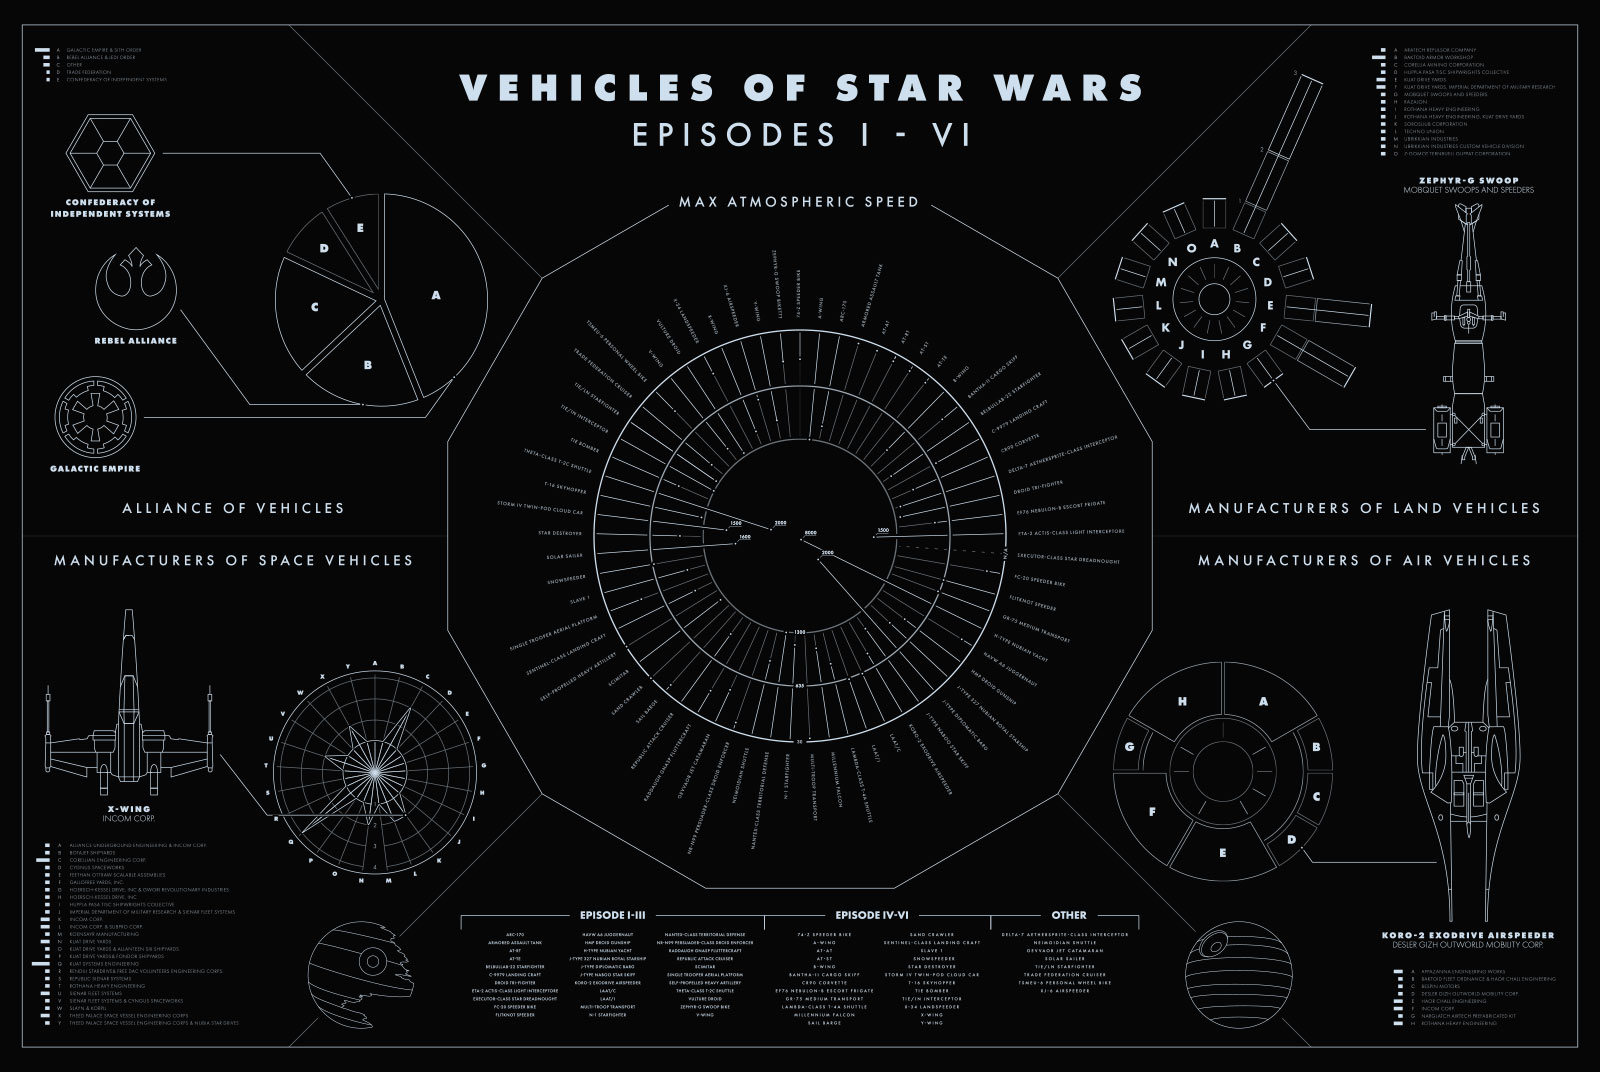 Vehicles of Star Wars poster